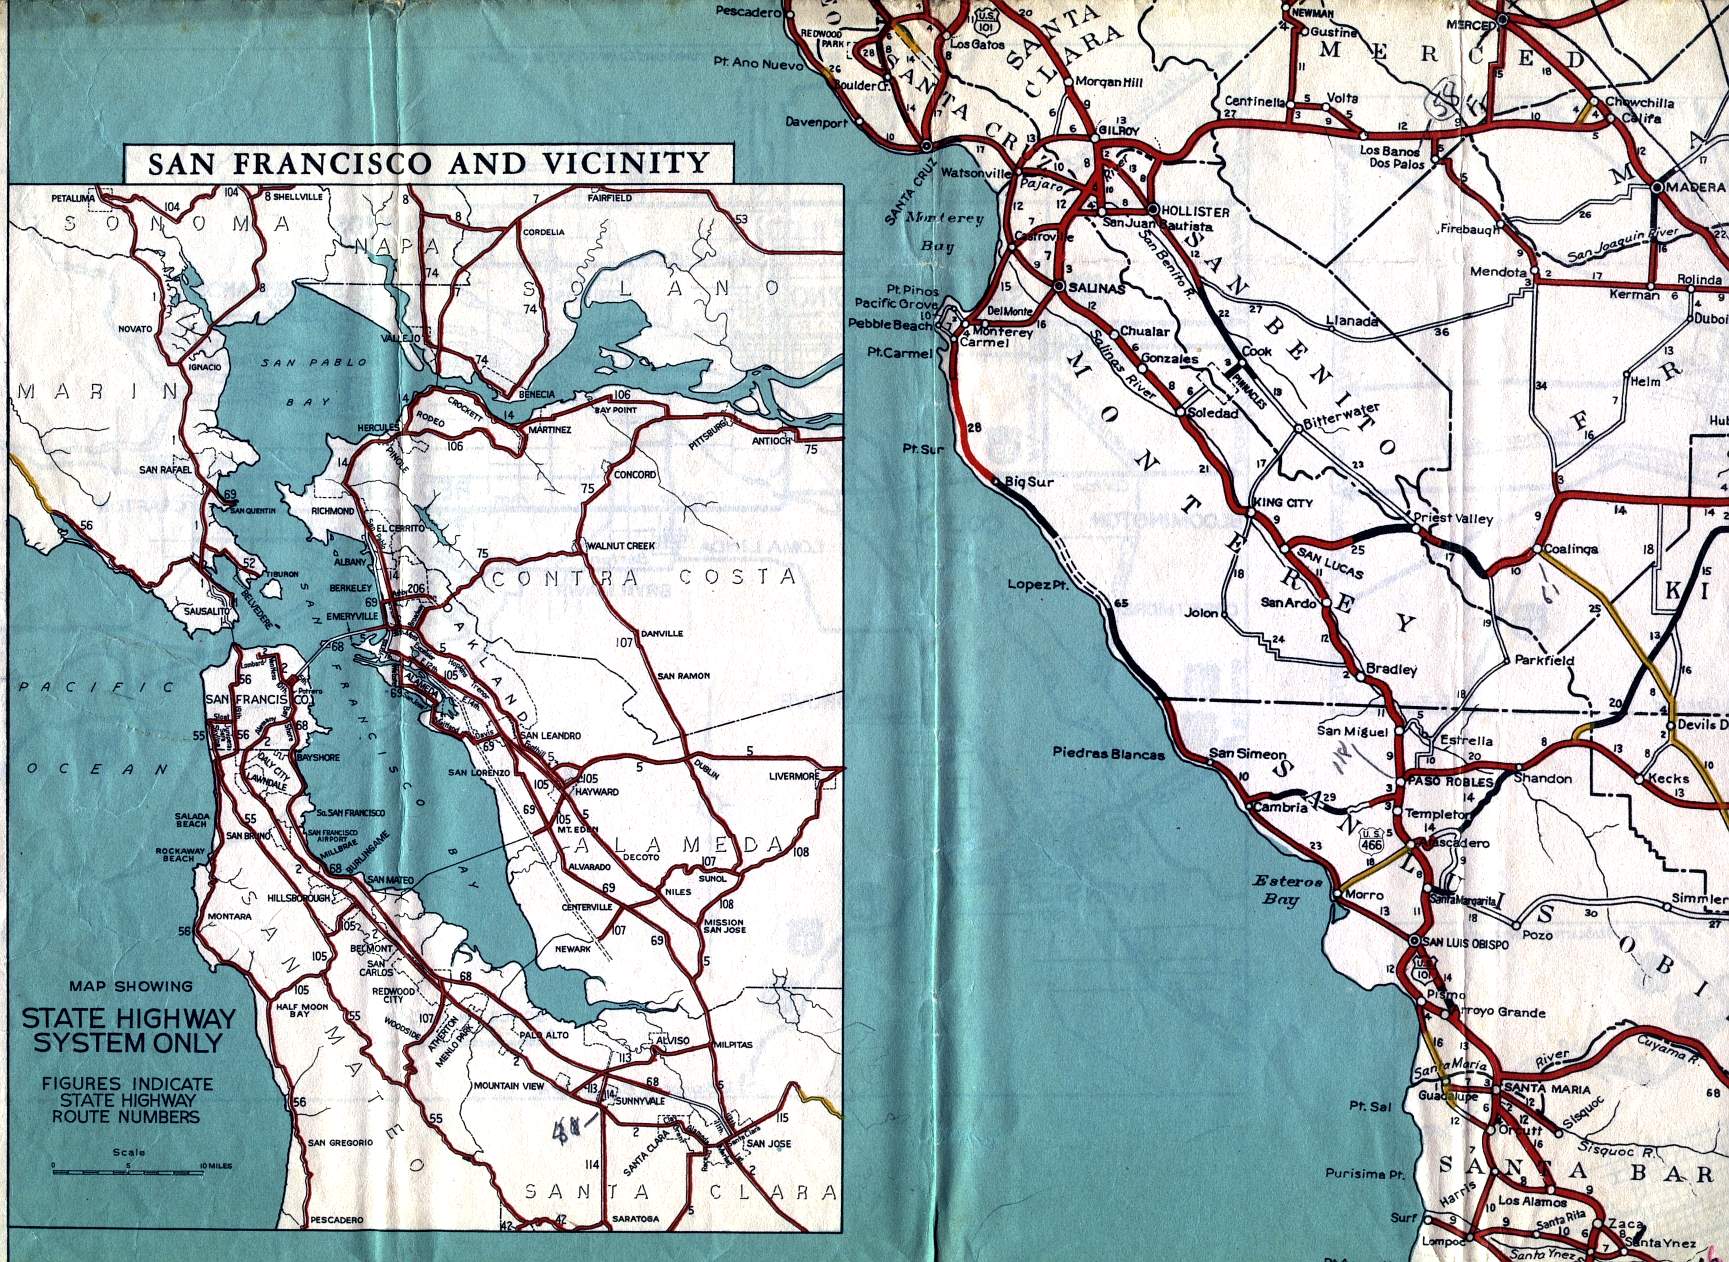 San Francisco and vicinity, as well as Monterey County, on the 1936 California official highway map